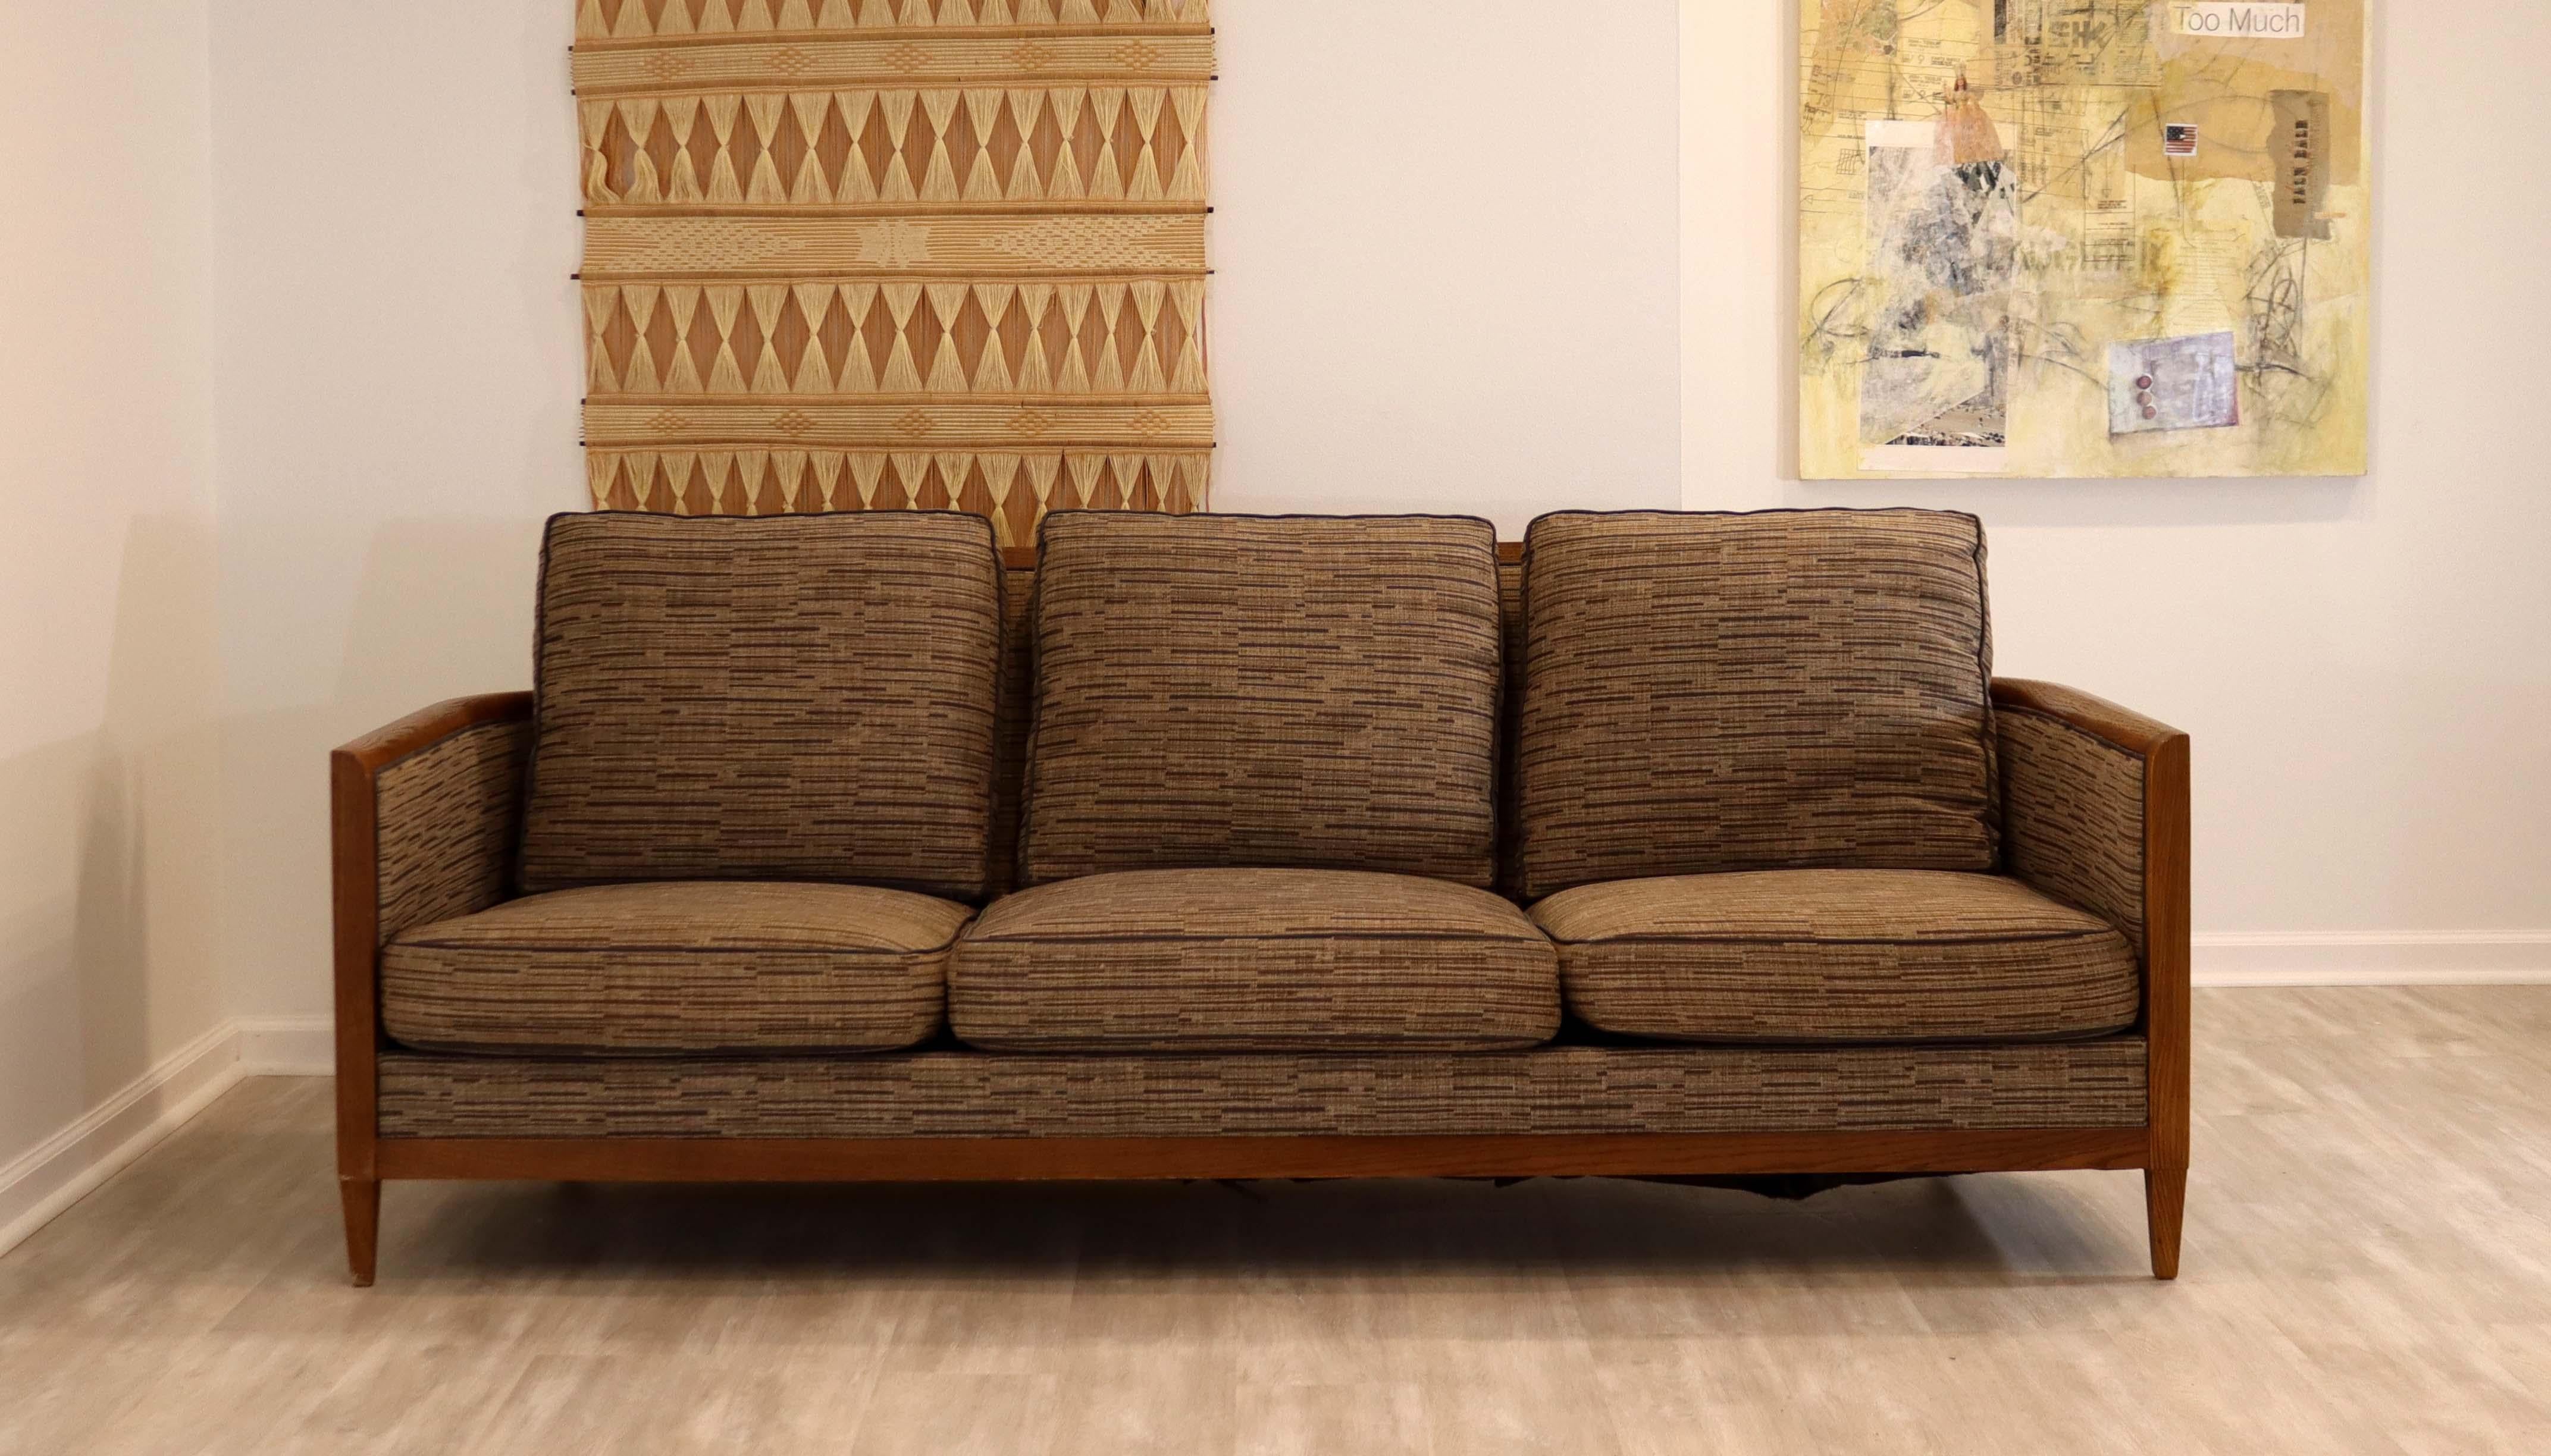 Up for sale is a stunning Holly Hunt 'Hemp Sail' sofa by John Hutton. Details include an oak architectural frame in an umber finish along with 3-over-3 cushions in a contrast welt upholstery. This sofa is in very good condition.

Dimensions: 84